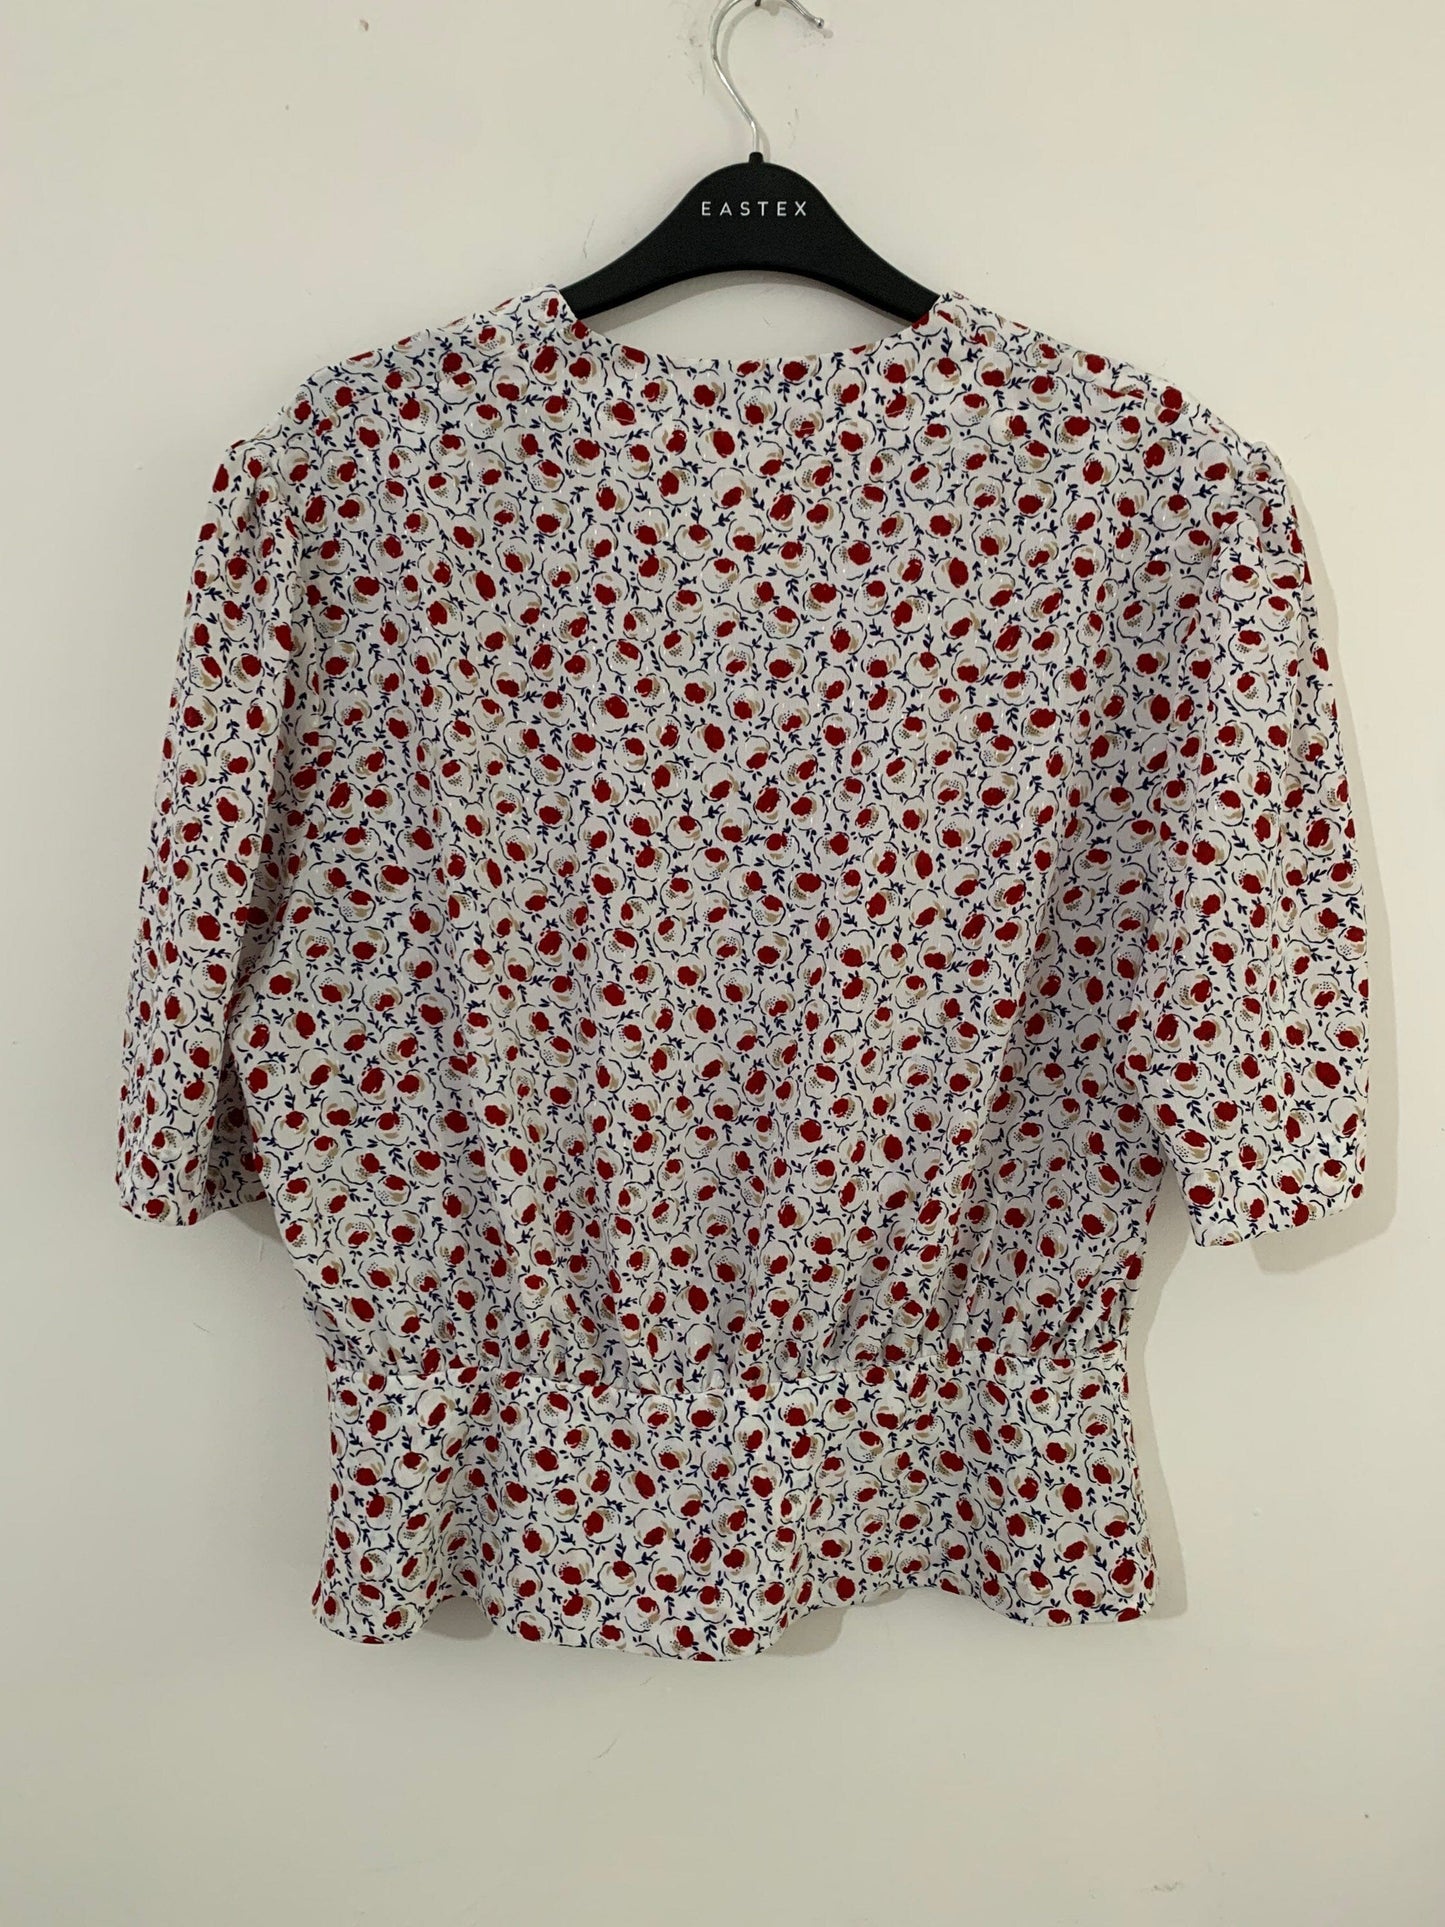 Navy, Red and White Vintage Peplum Blouse Floral Pattern Button Through Boxy short Sleeves - Size 14 - Eastex